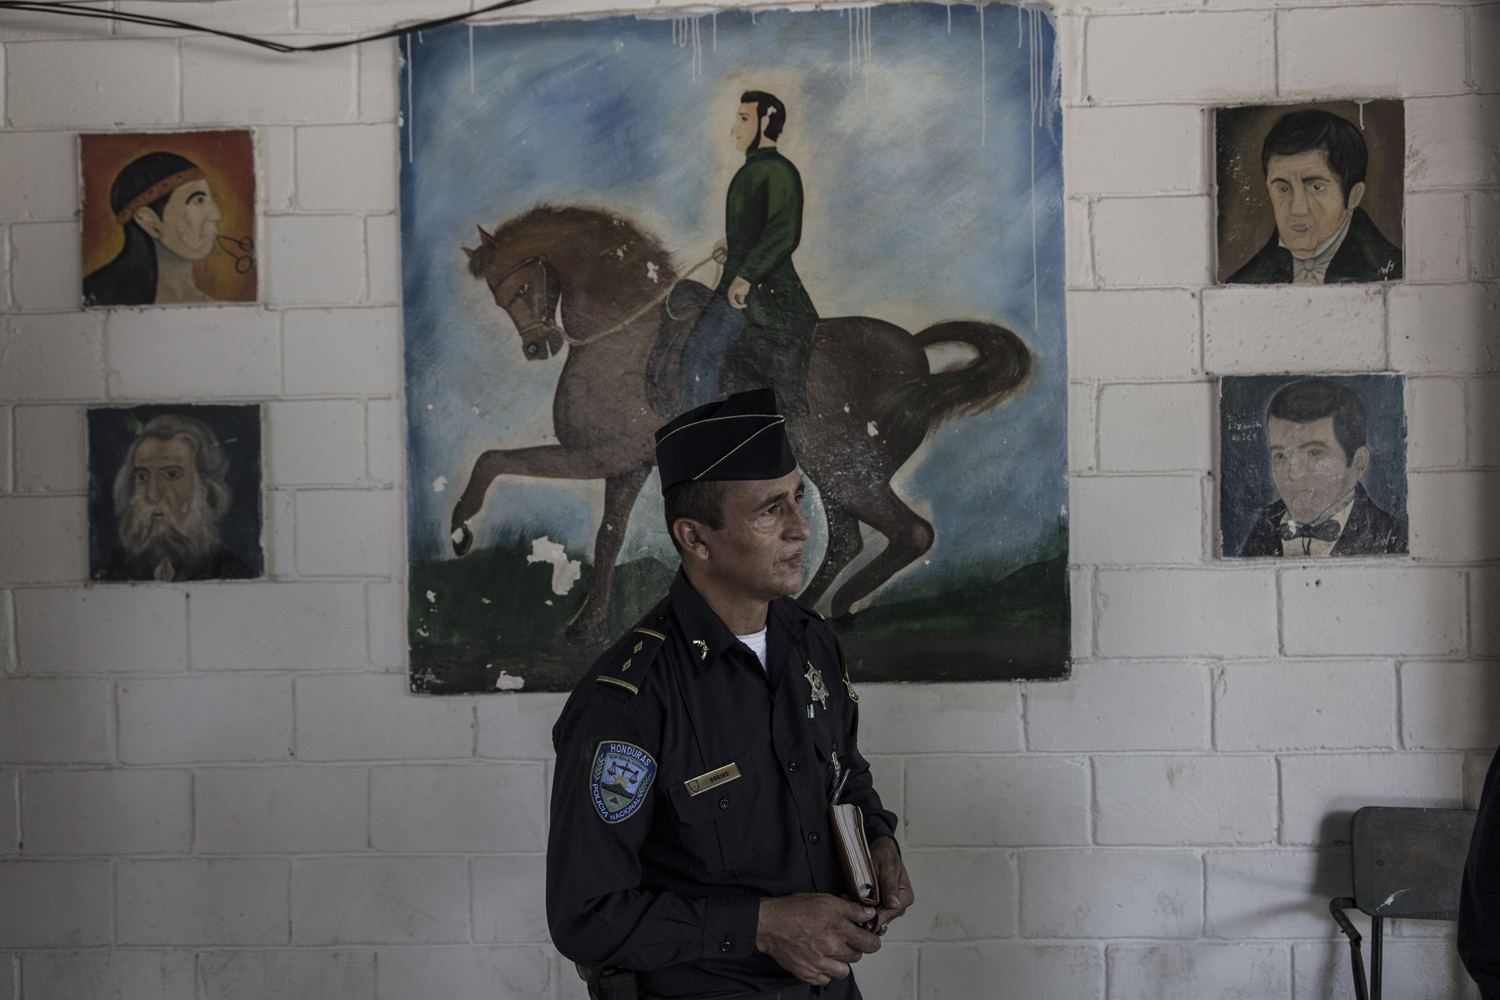 A police official during a visit by American Congressmen in Chamelecón. San Pedro Sula, Honduras. July 19, 2014.